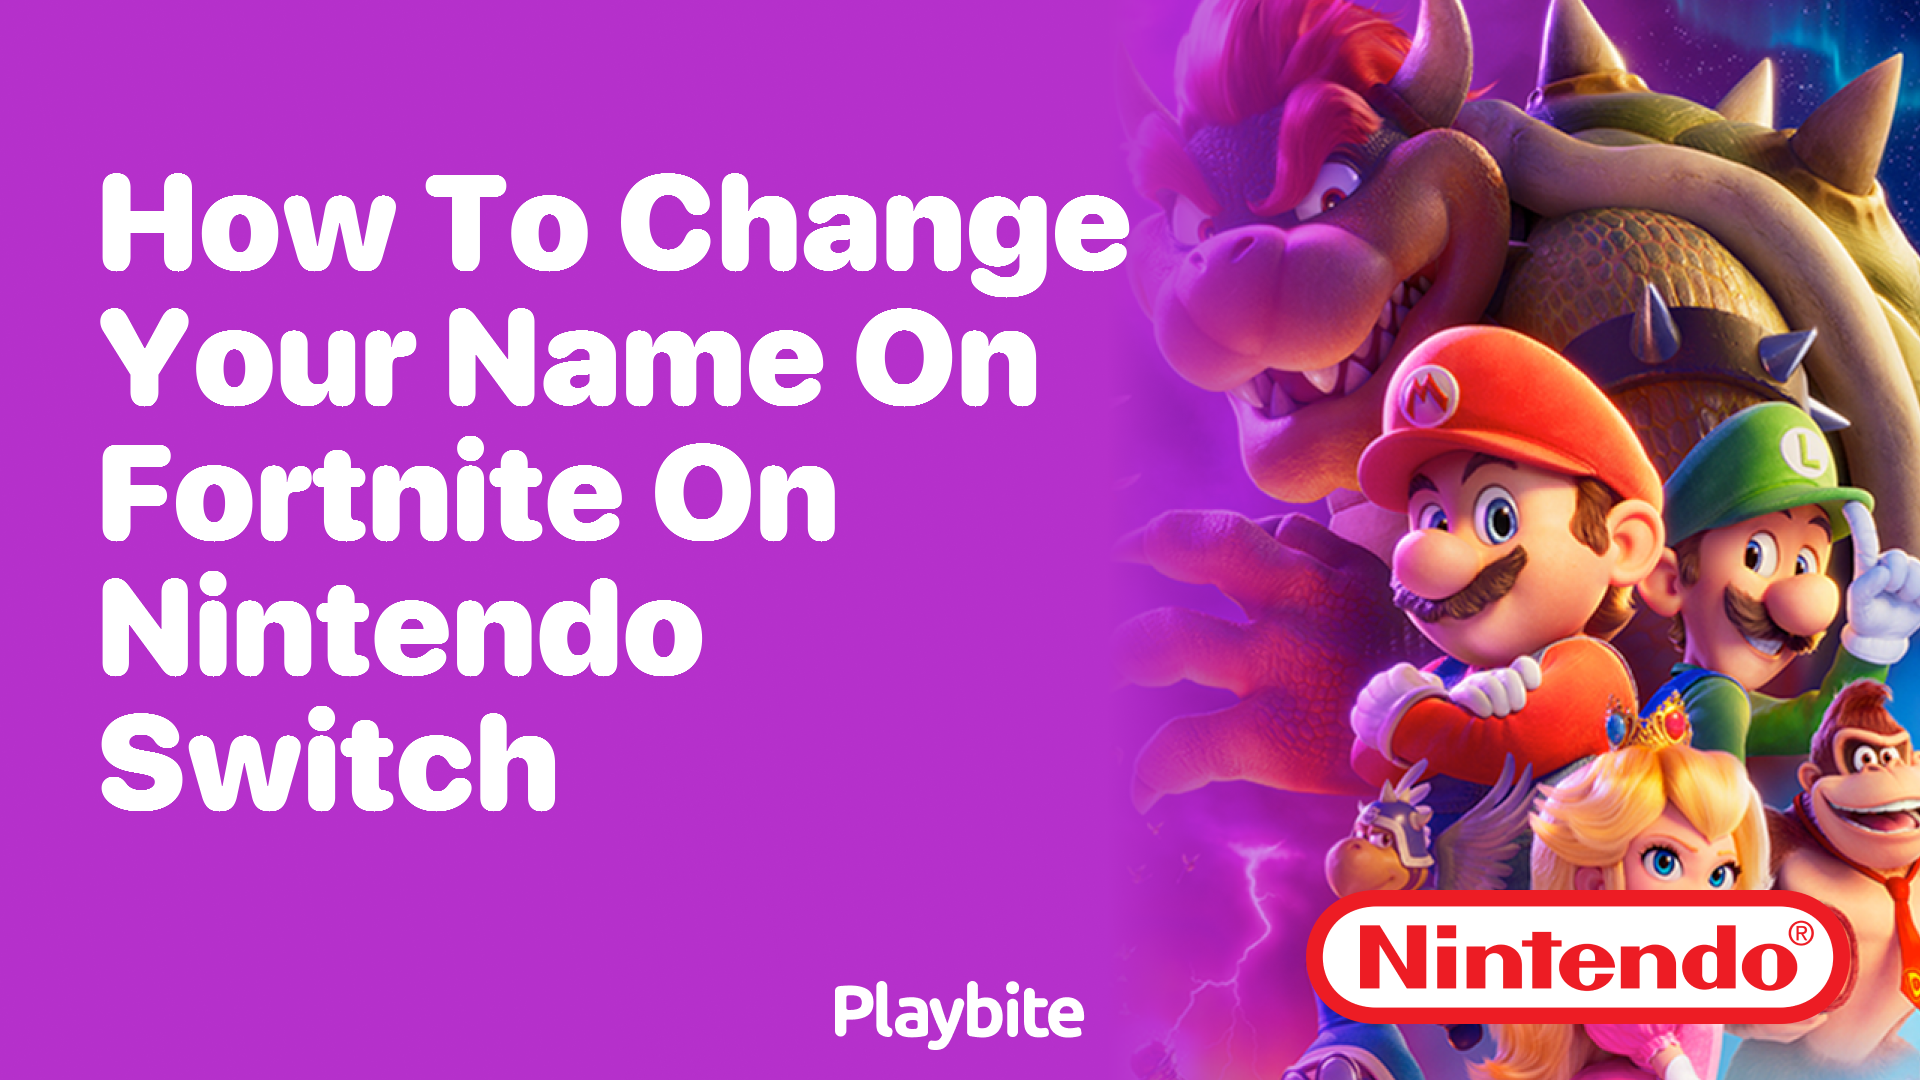 How to Change Your Name on Fortnite on Nintendo Switch